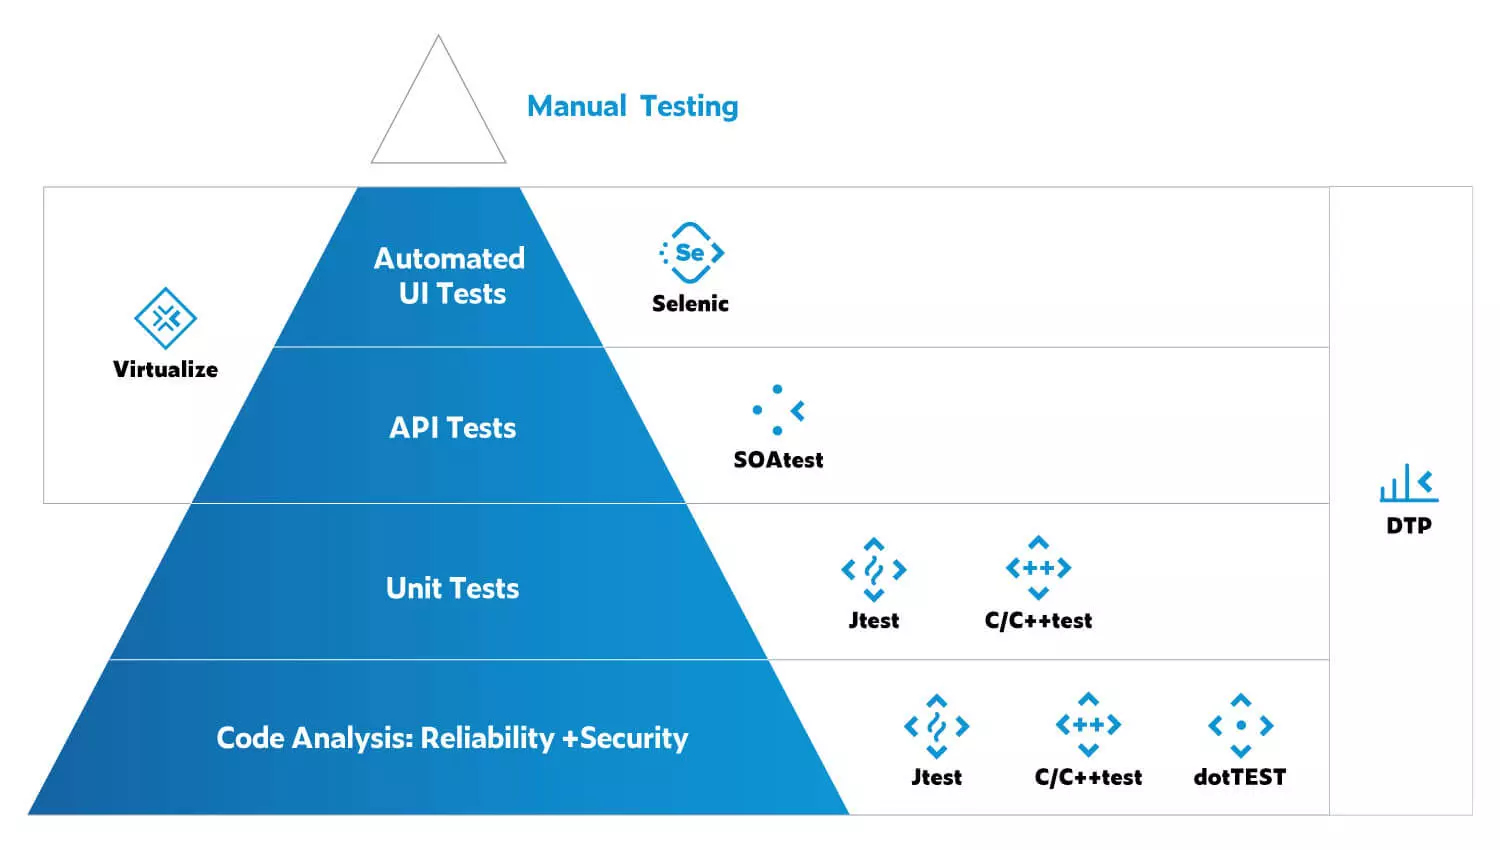 Testing pyramid showing where Parasoft automated testing tools fall within each stage.